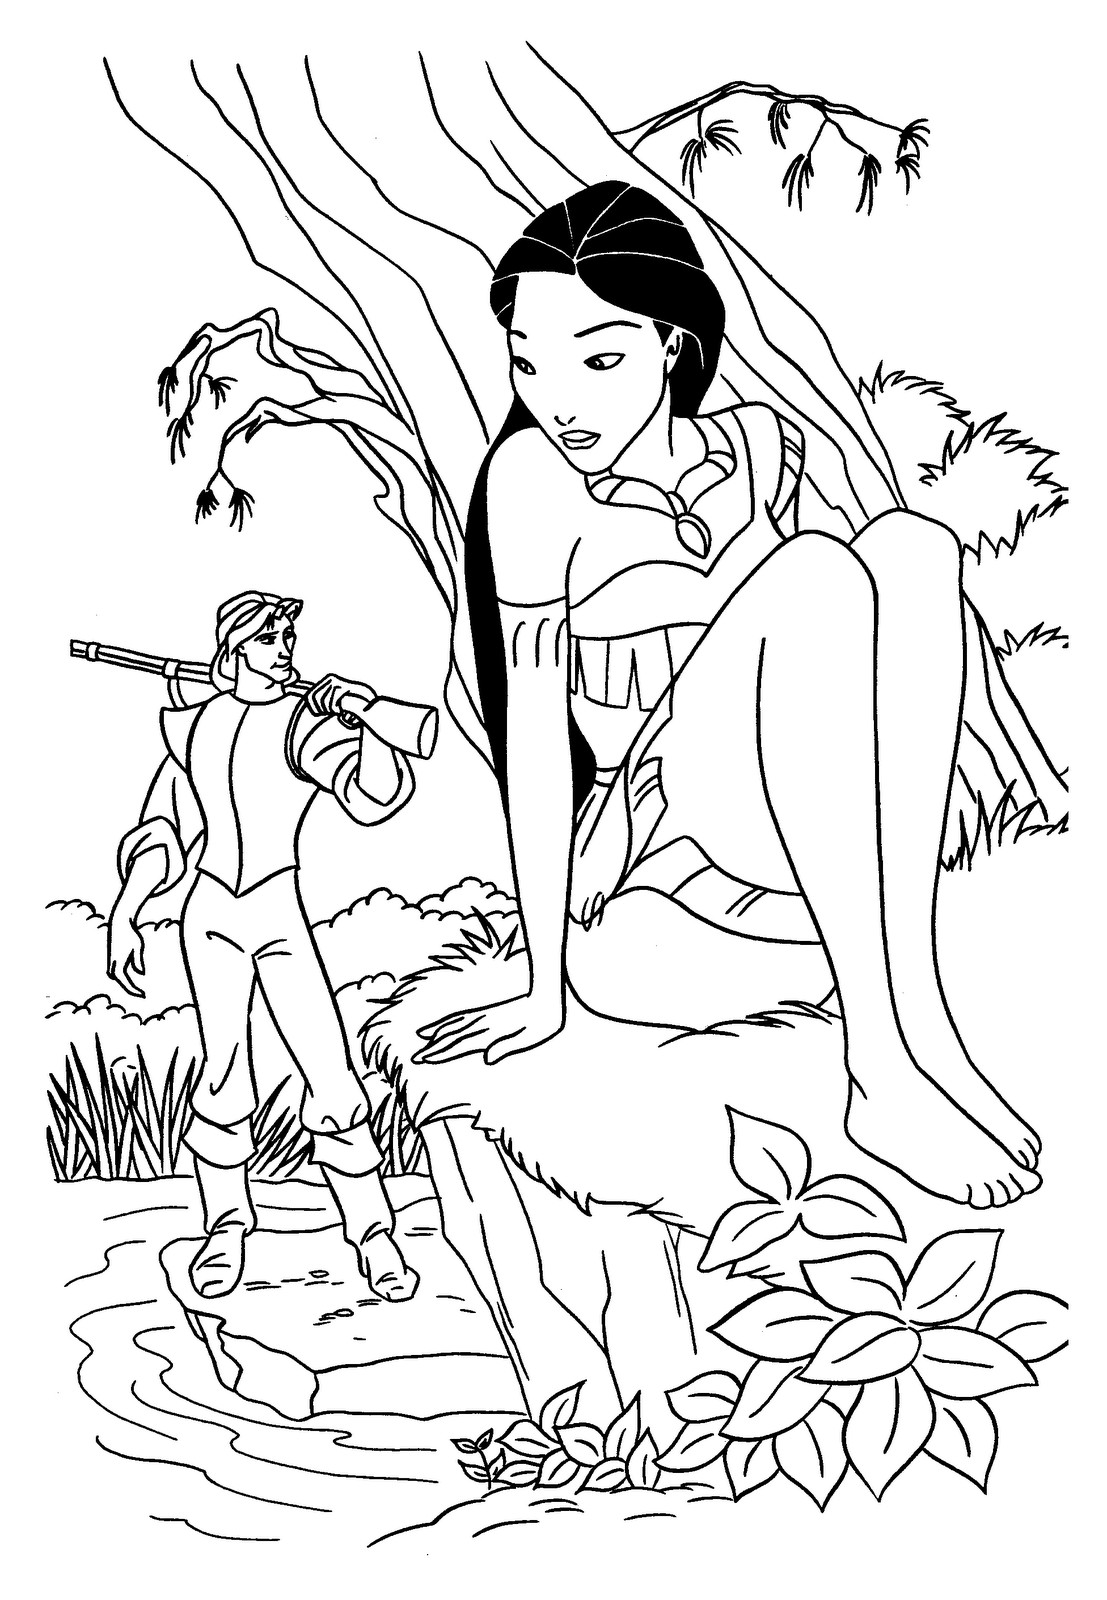 Disney Princess Coloring Pages For Kids
 Coloring Pages For Kids Disney Princess Pocahontas